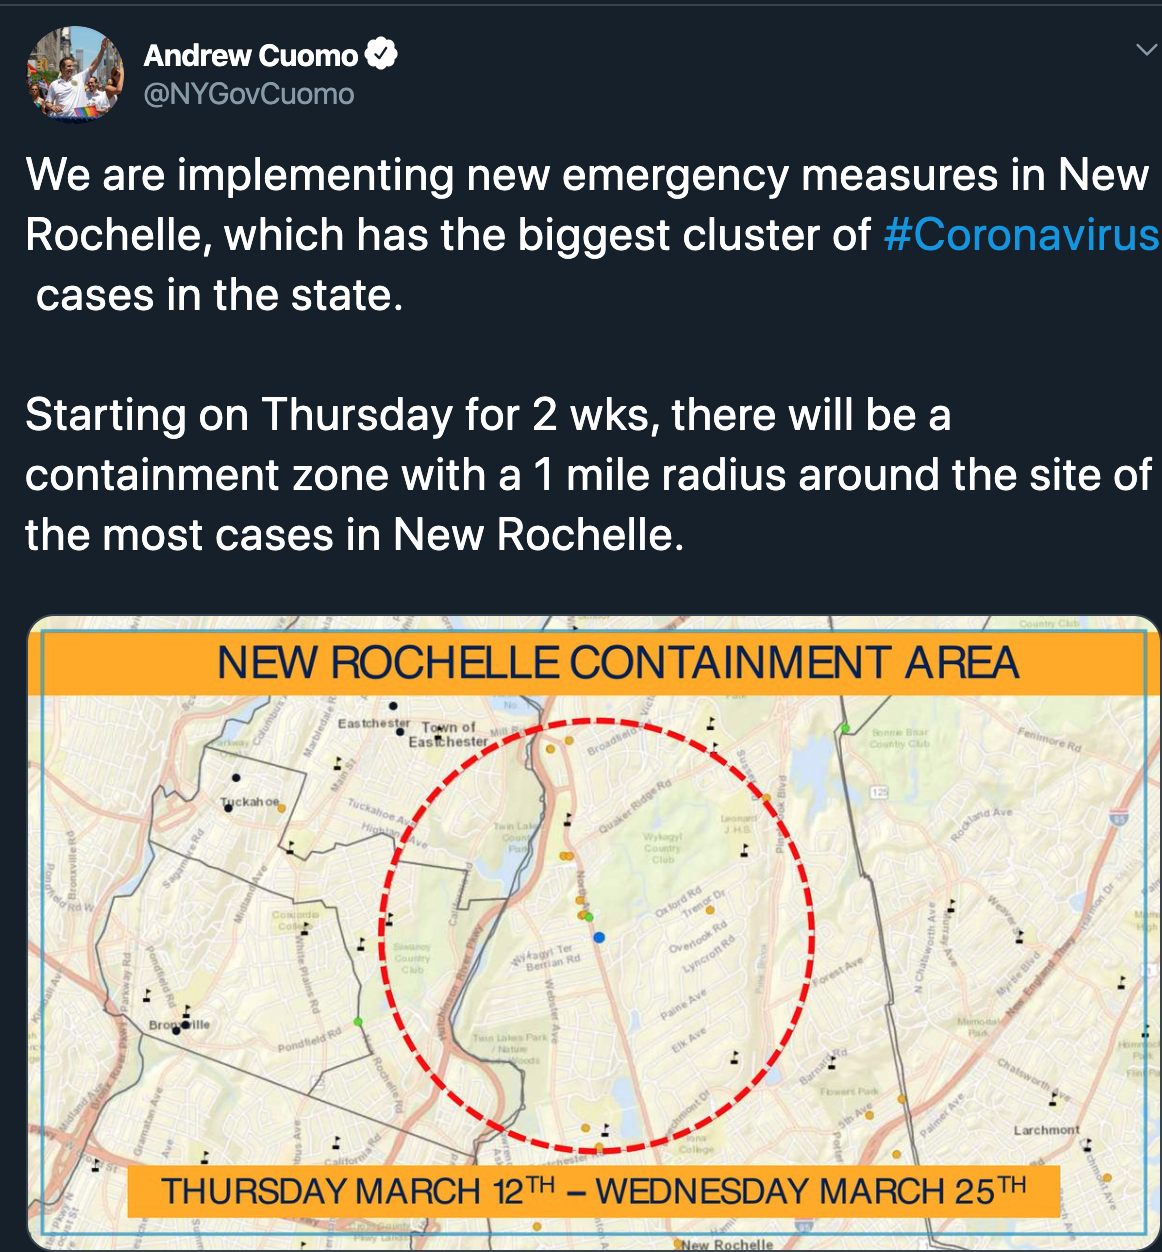 New York's governor outlines new emergency measures in New Rochelle